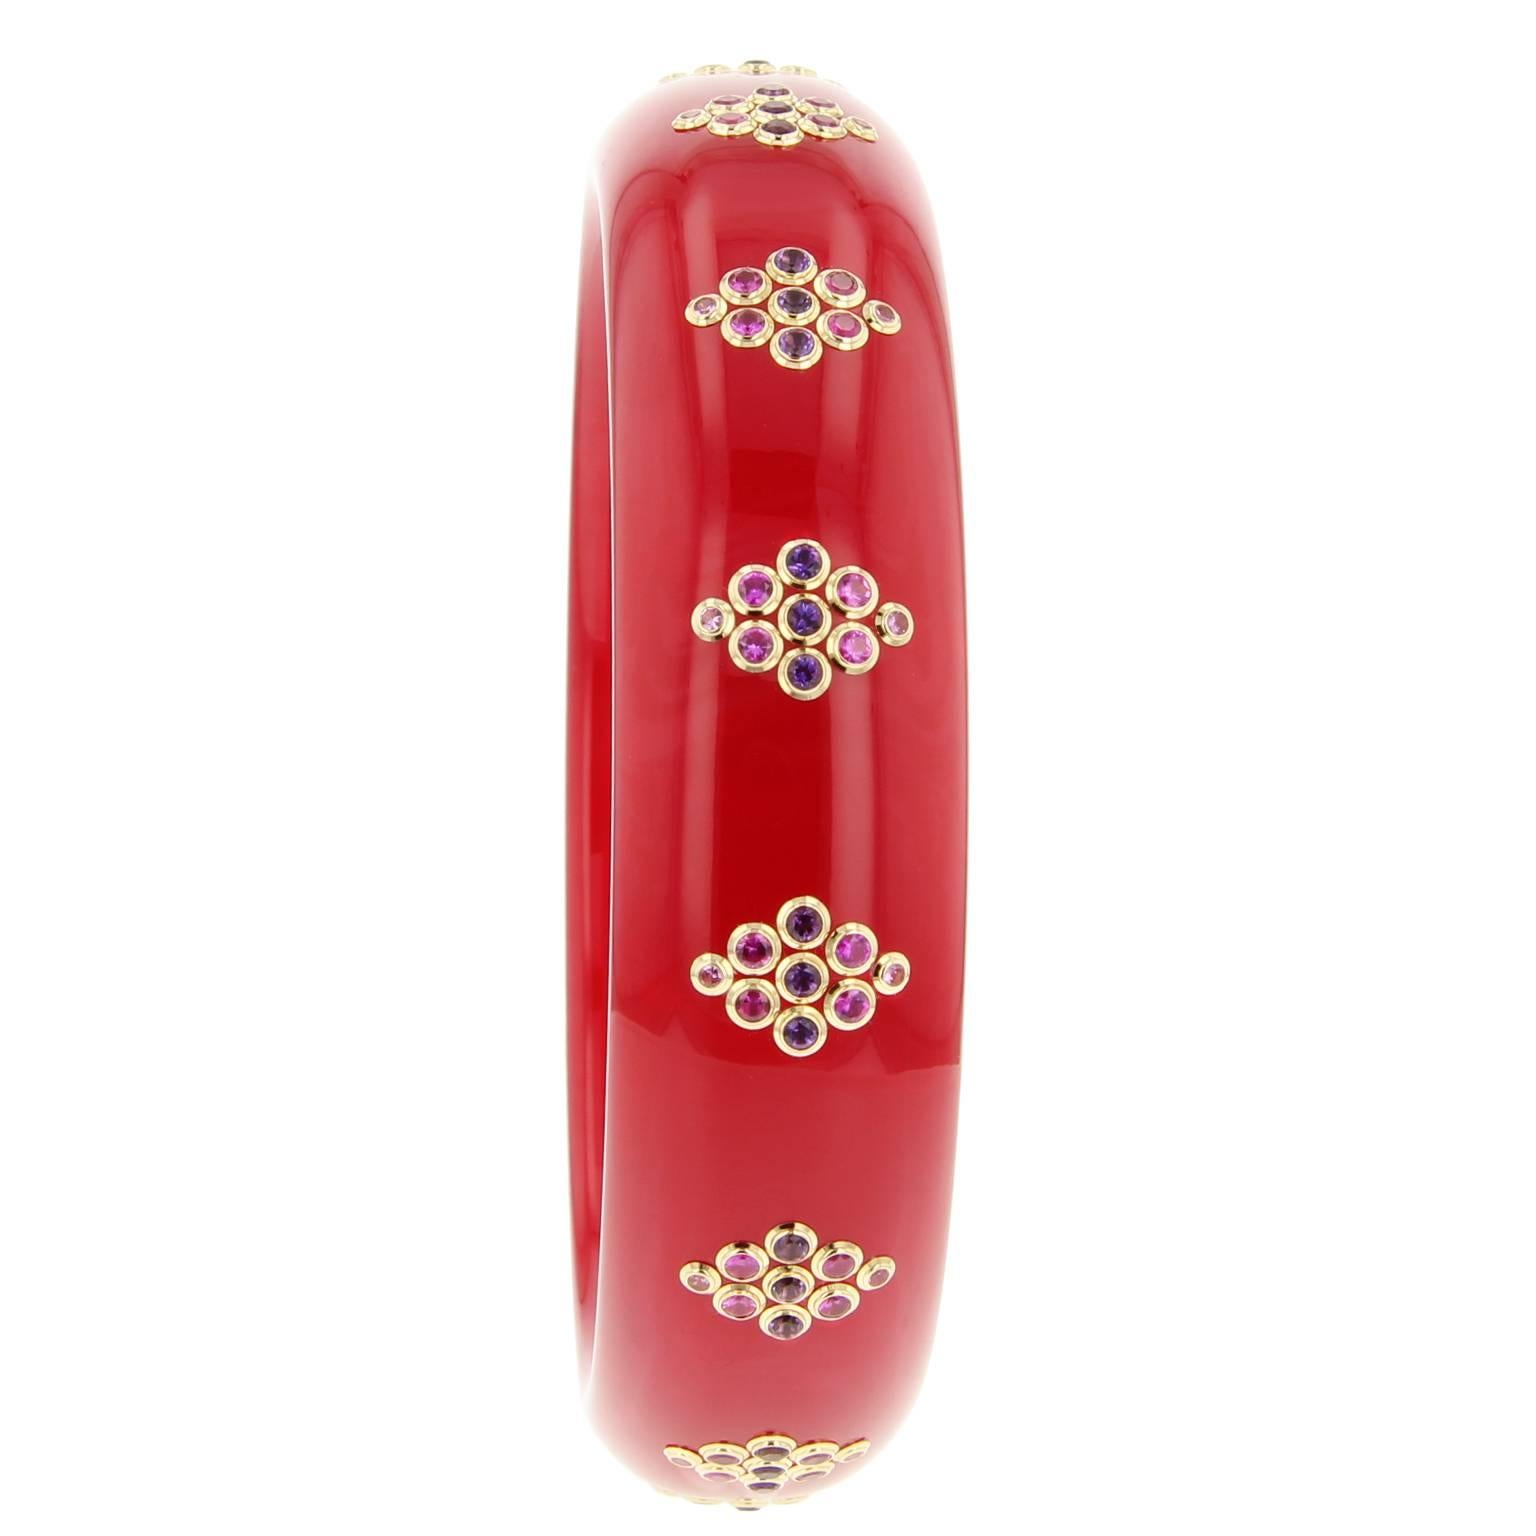 This beautiful red Mark Davis bangle was handcrafted of vintage solid red bakelite.  The applied diamond-shaped motifs are created using amethyst and very fine pink sapphires set in 18k yellow gold bezels.  

Full details below: 
• From the Mark